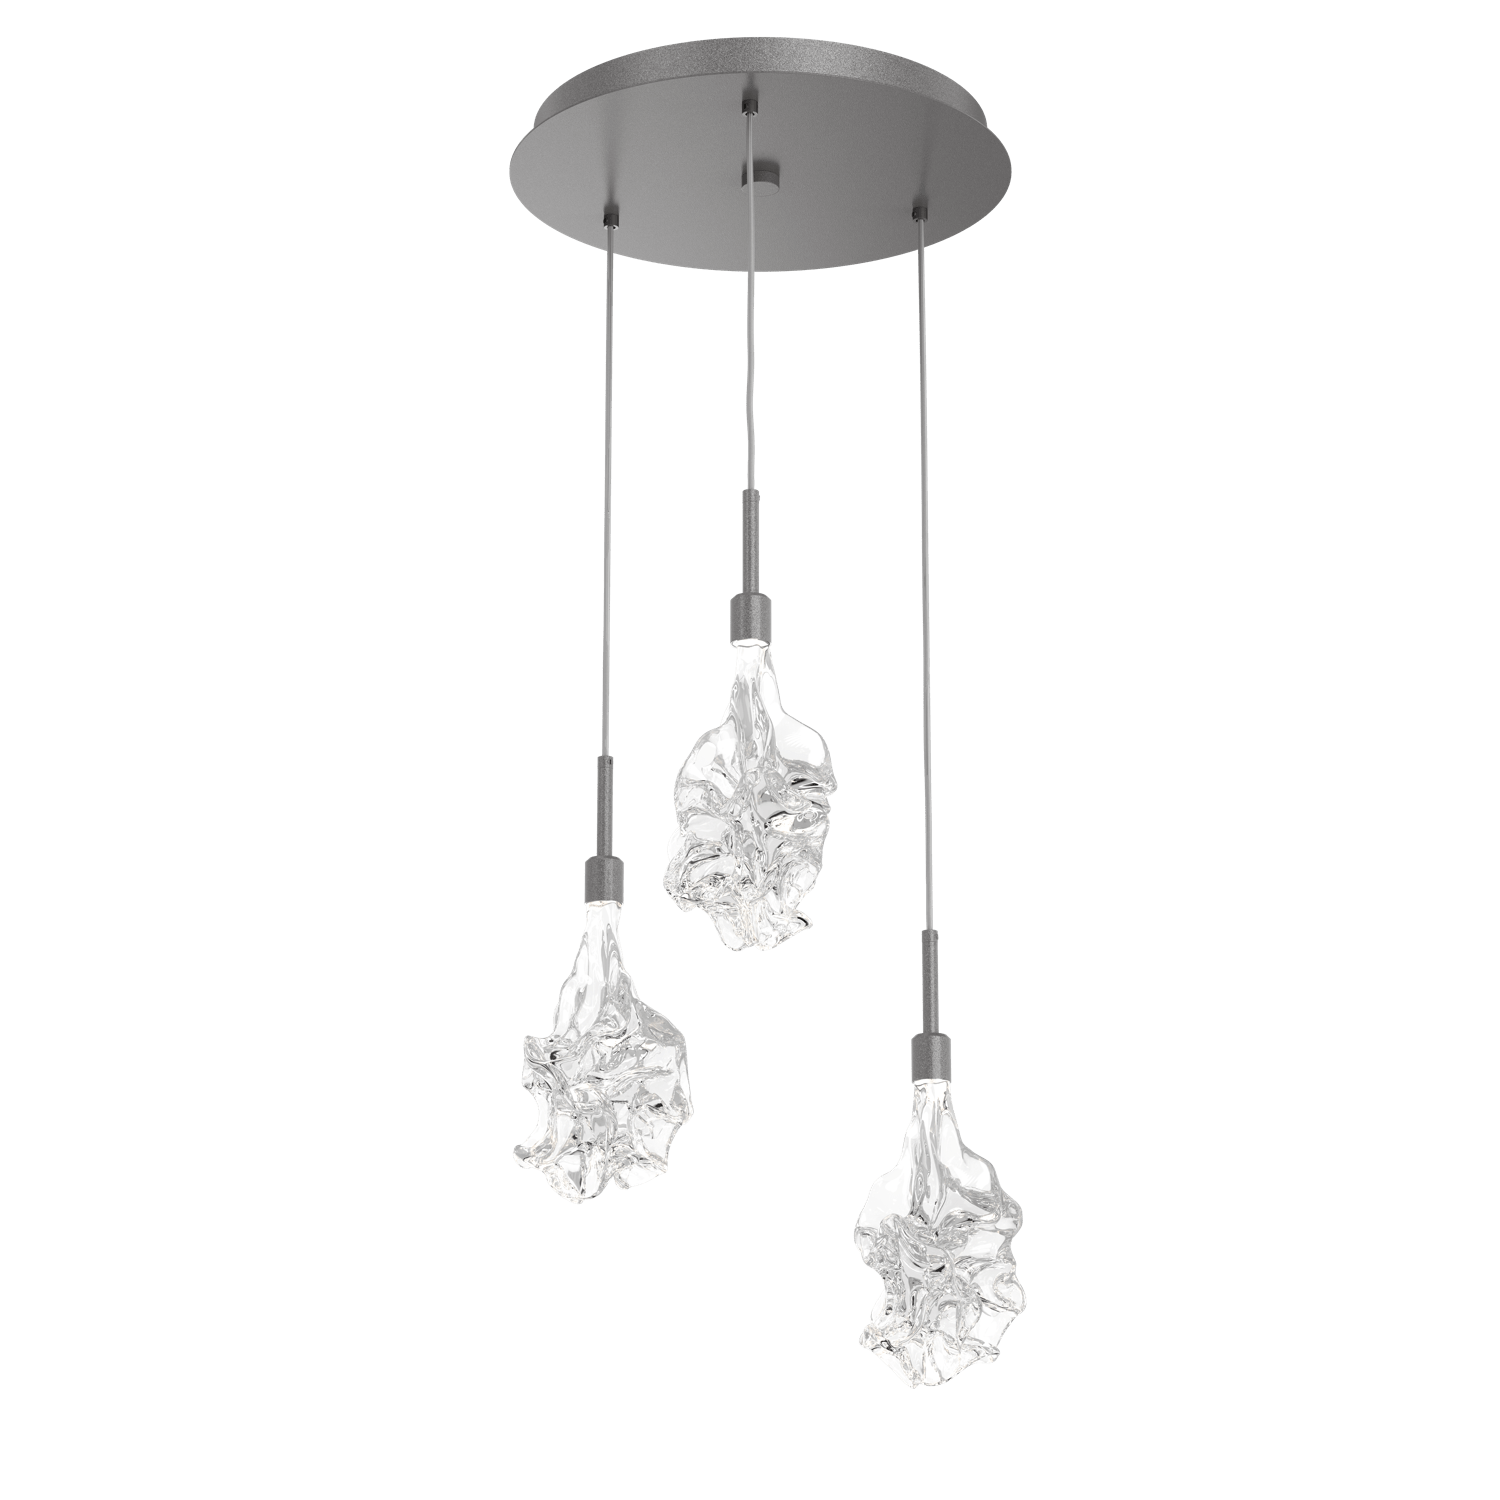 CHB0059-03-GP-Hammerton-Studio-Blossom-3-light-round-pendant-chandelier-with-graphite-finish-and-clear-handblown-crystal-glass-shades-and-LED-lamping